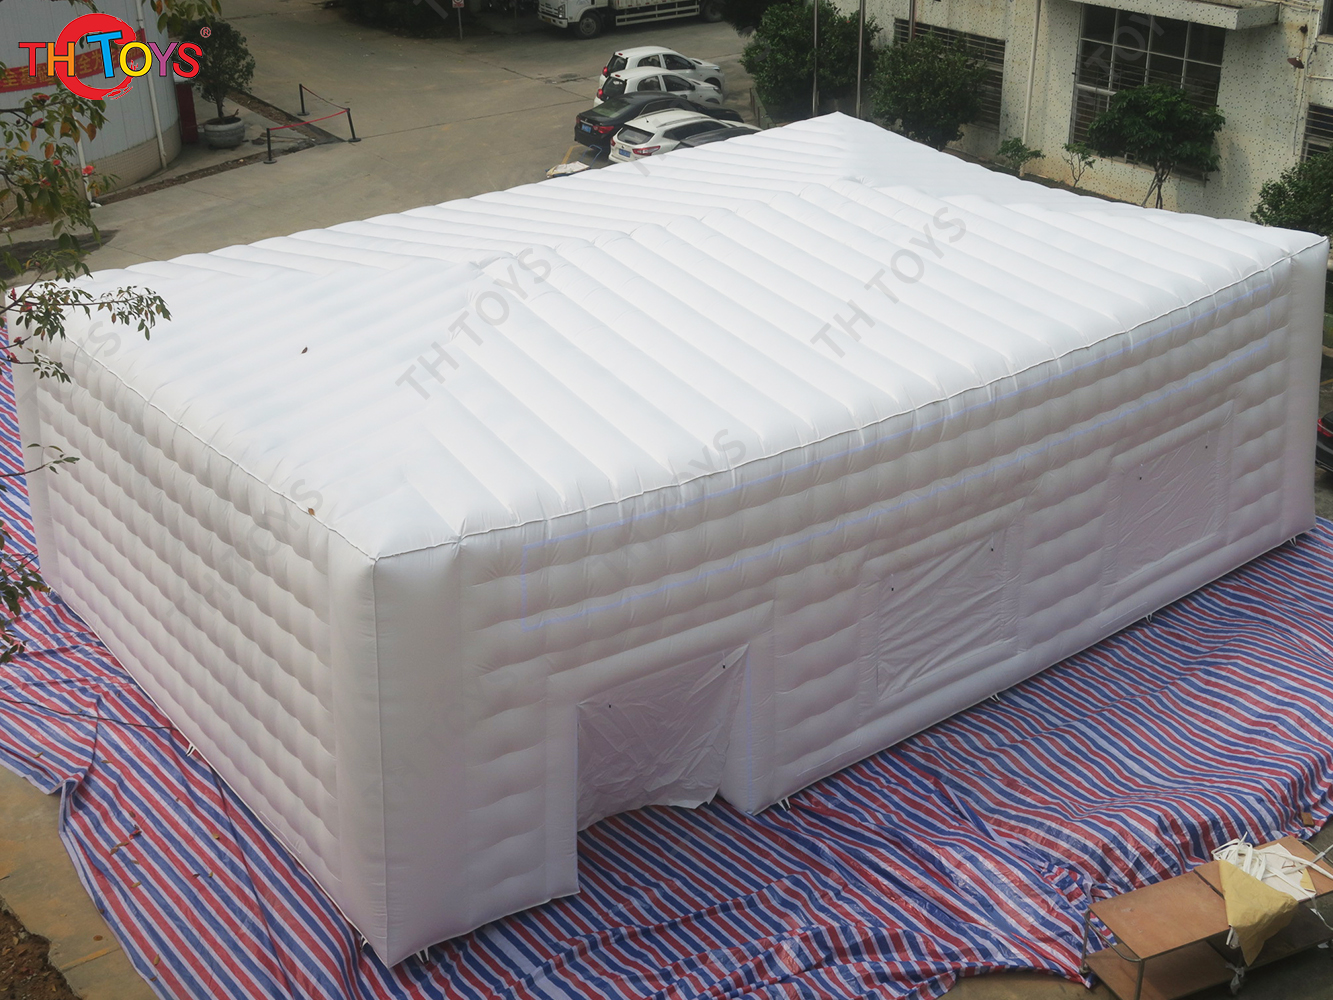 giant inflatable marquee party tent, outdoor white inflatable cube tent for sale